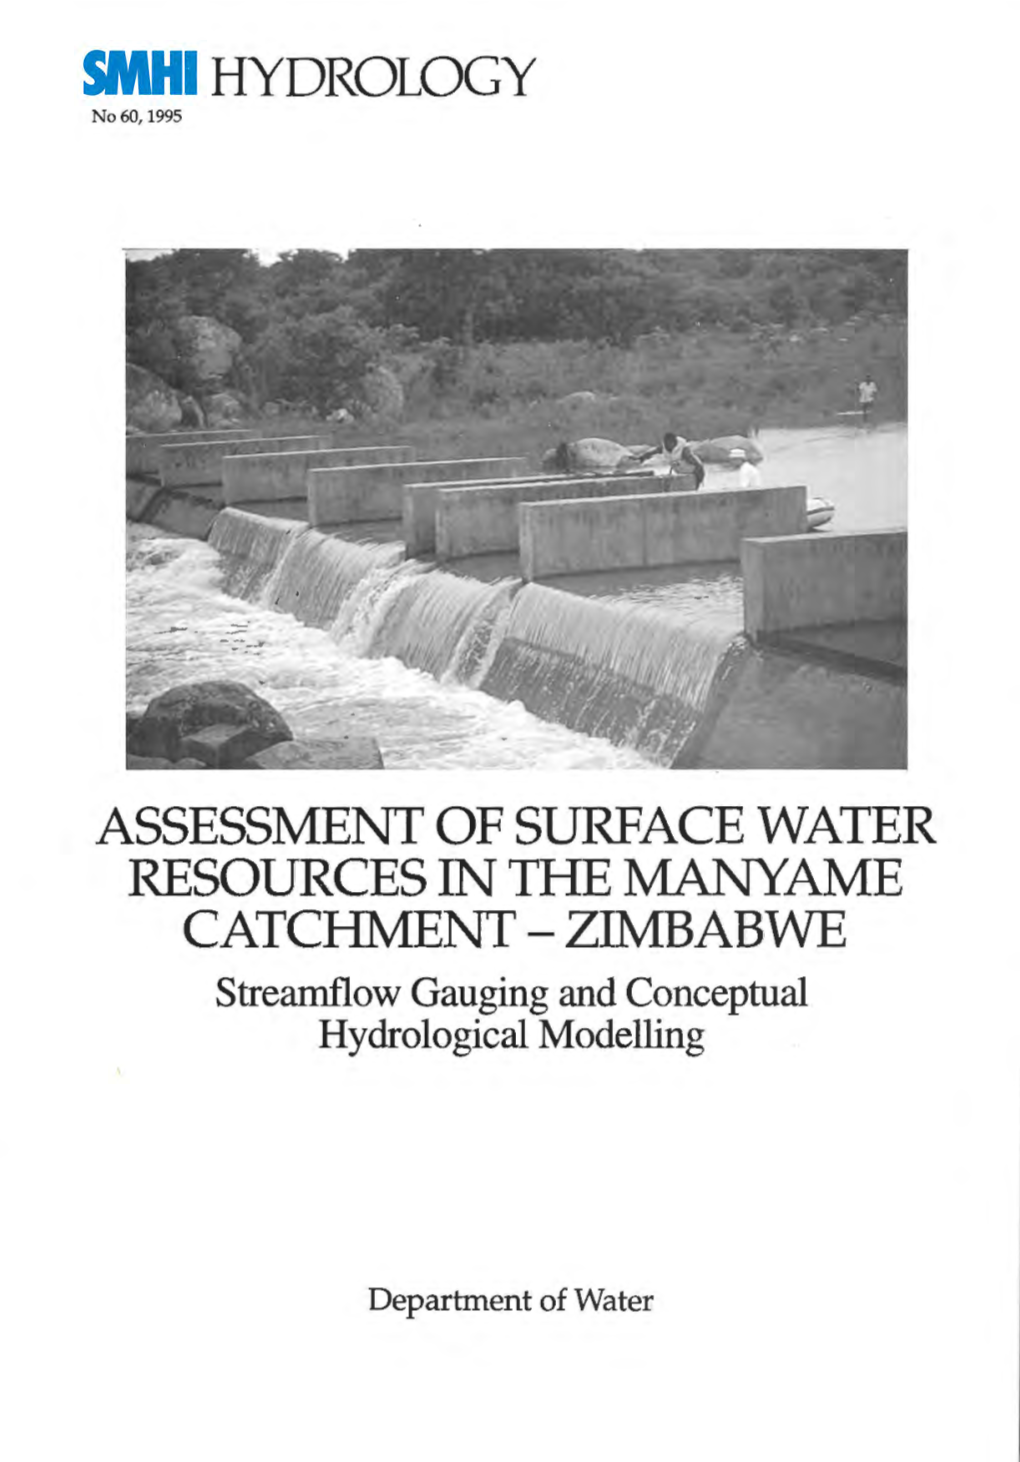 ASSESSMENT of SURFACE WATER RESOURCES in the MANYAME CATCHMENT - ZIMBABWE Streamflow Gauging and Conceptual Hydrological Modelling